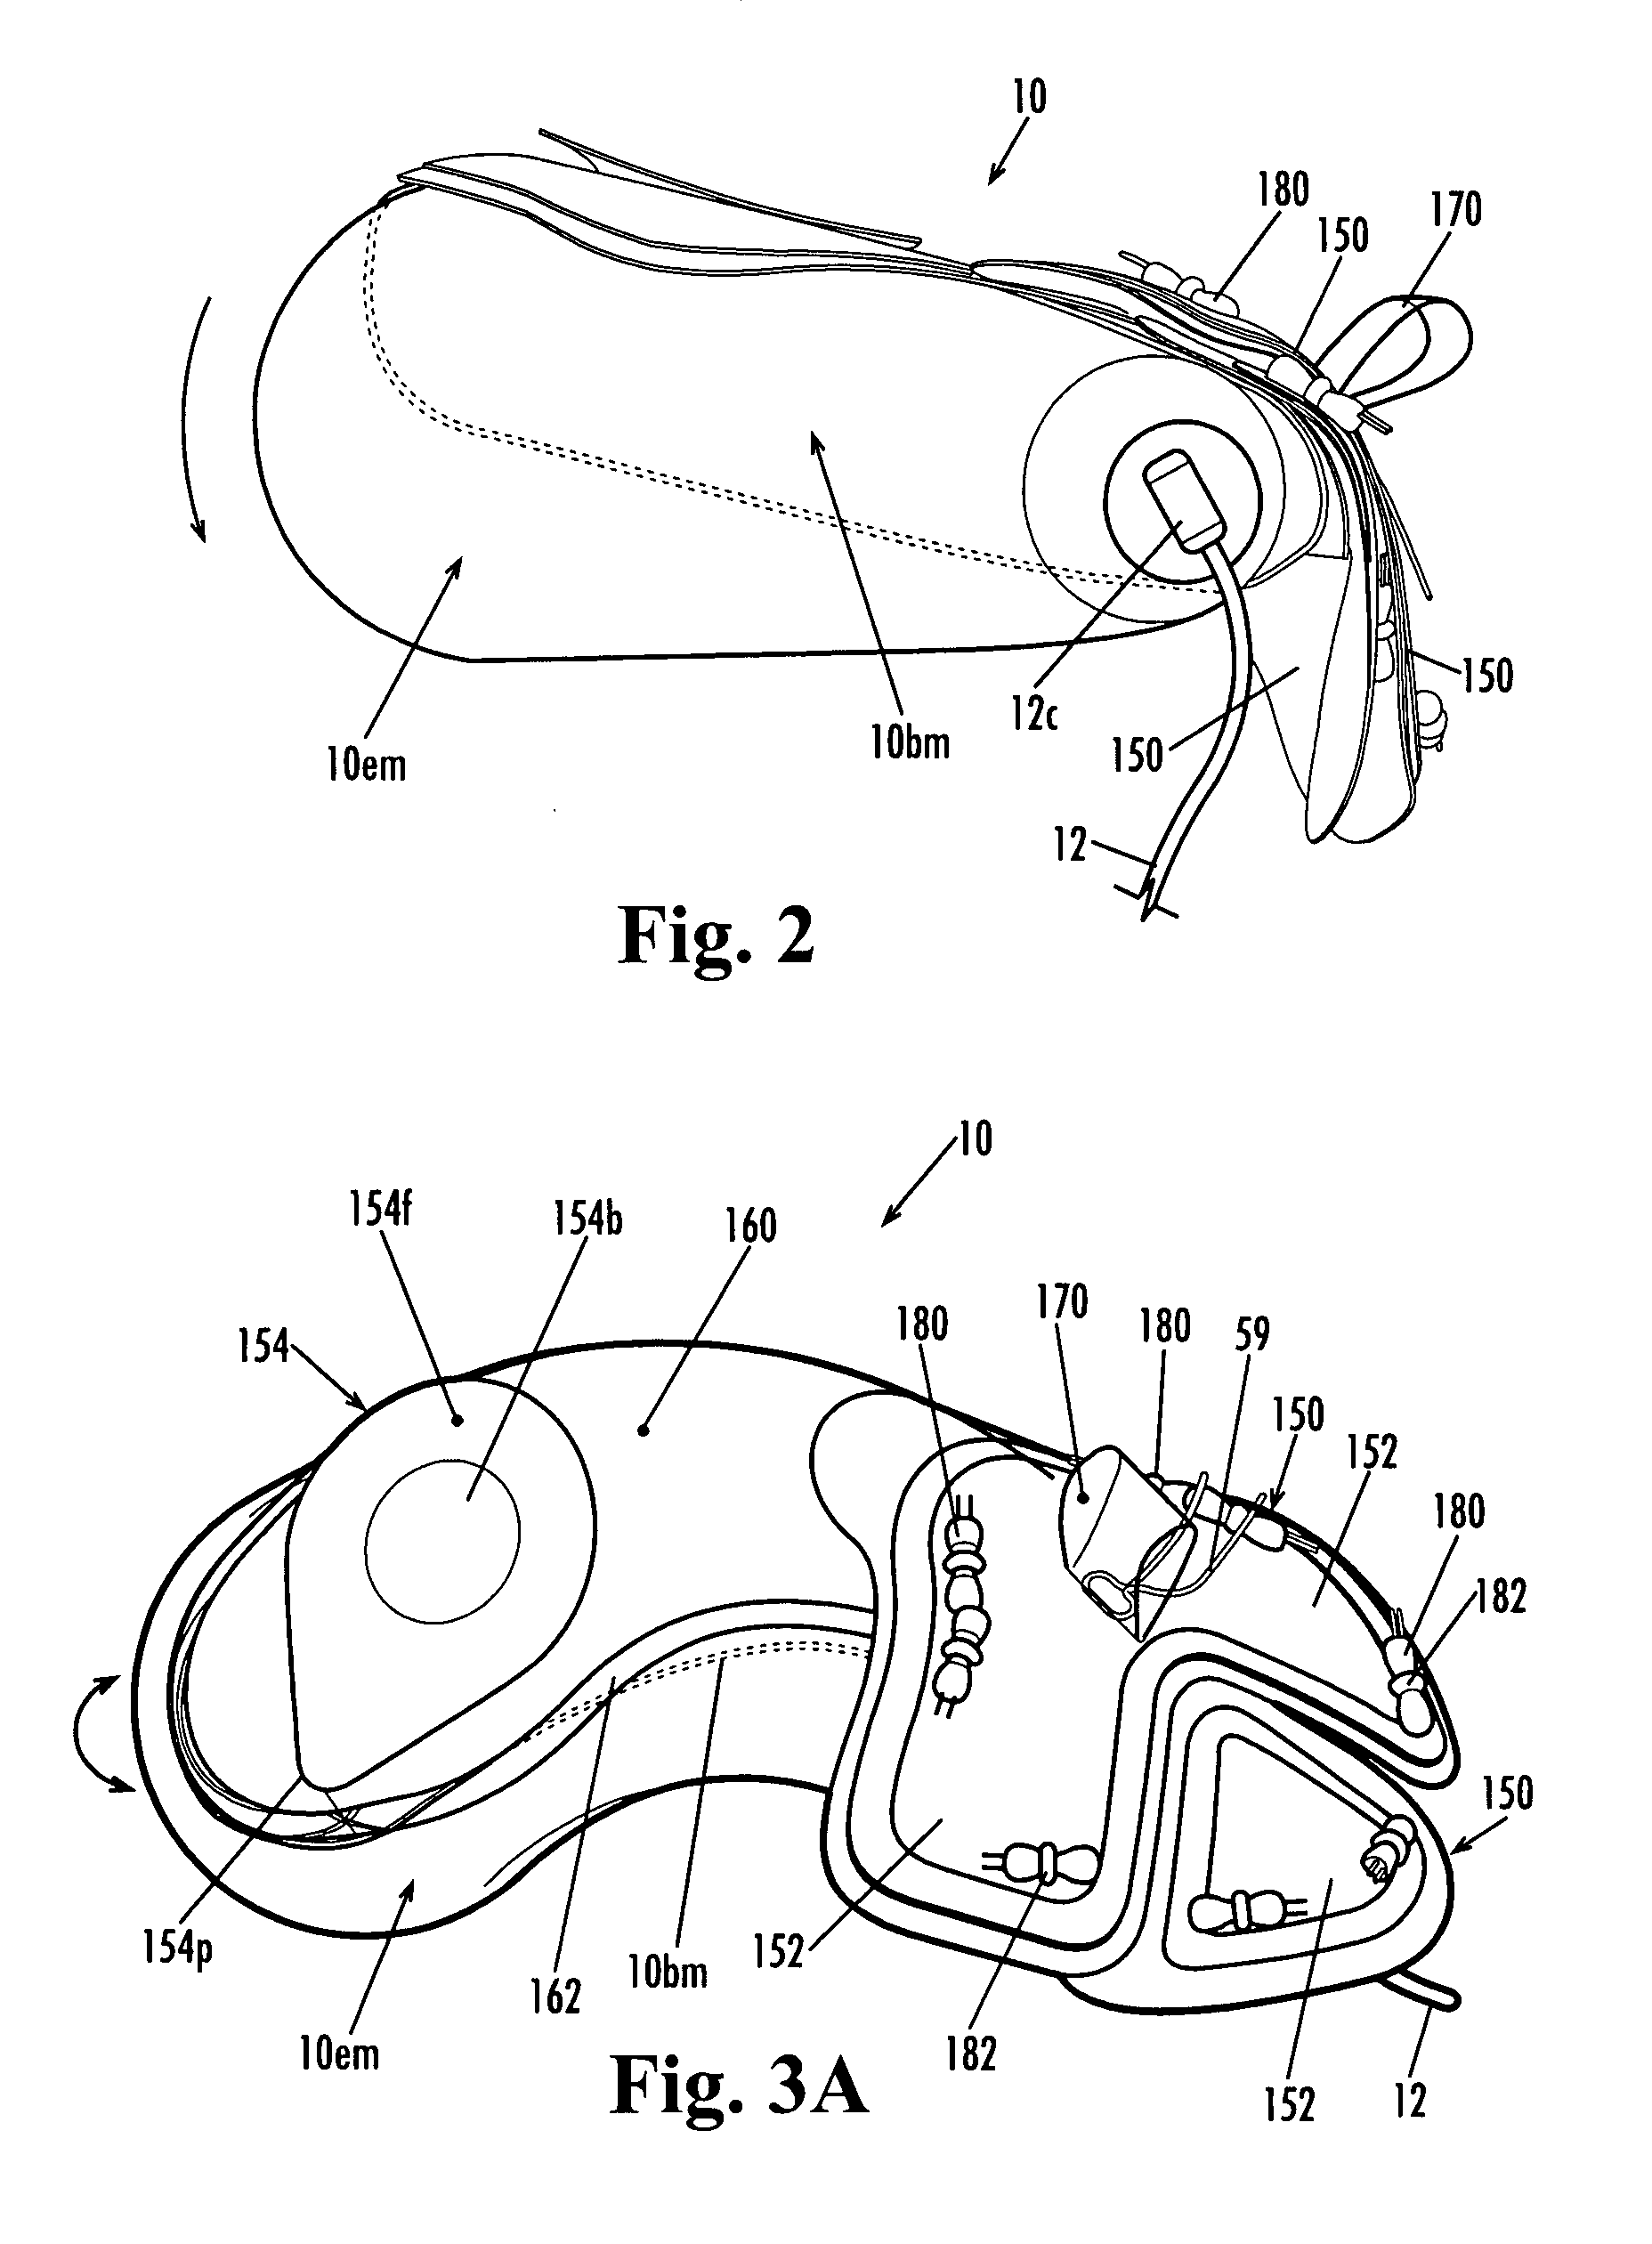 Devices and methods for treatment of obesity